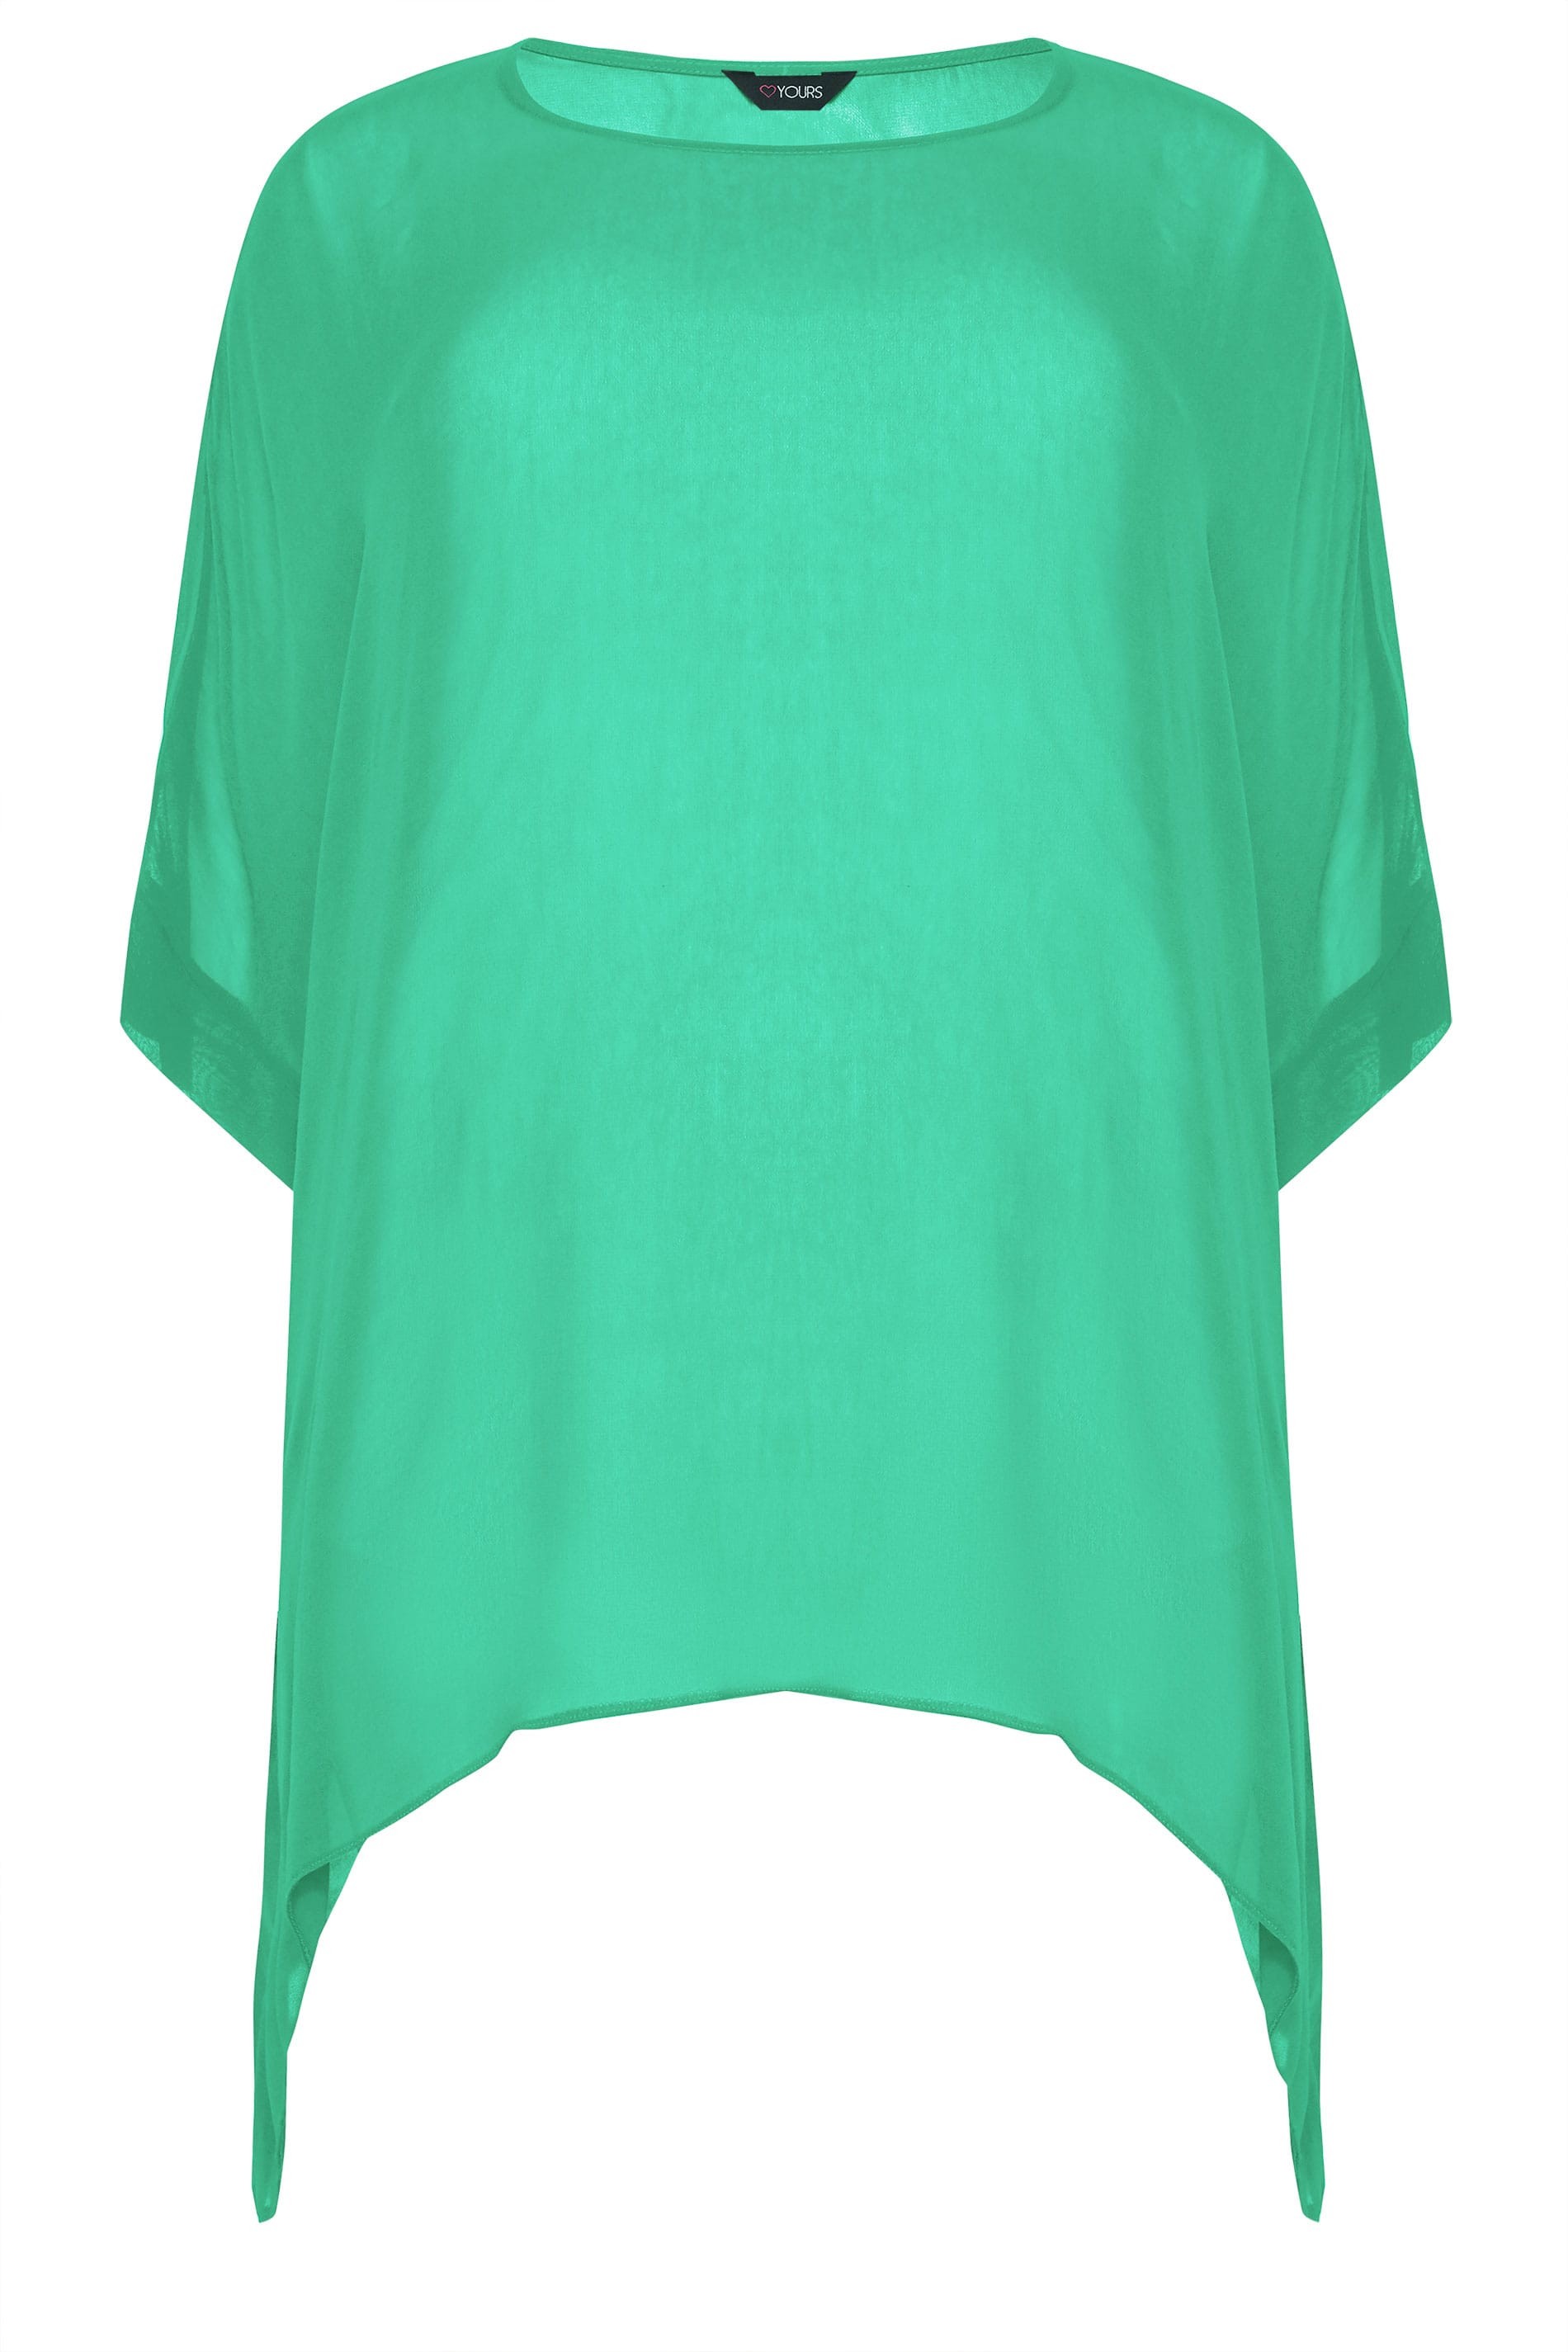 SIZE UP Green Chiffon Cape Top | Sizes 16 to 36 | Yours Clothing